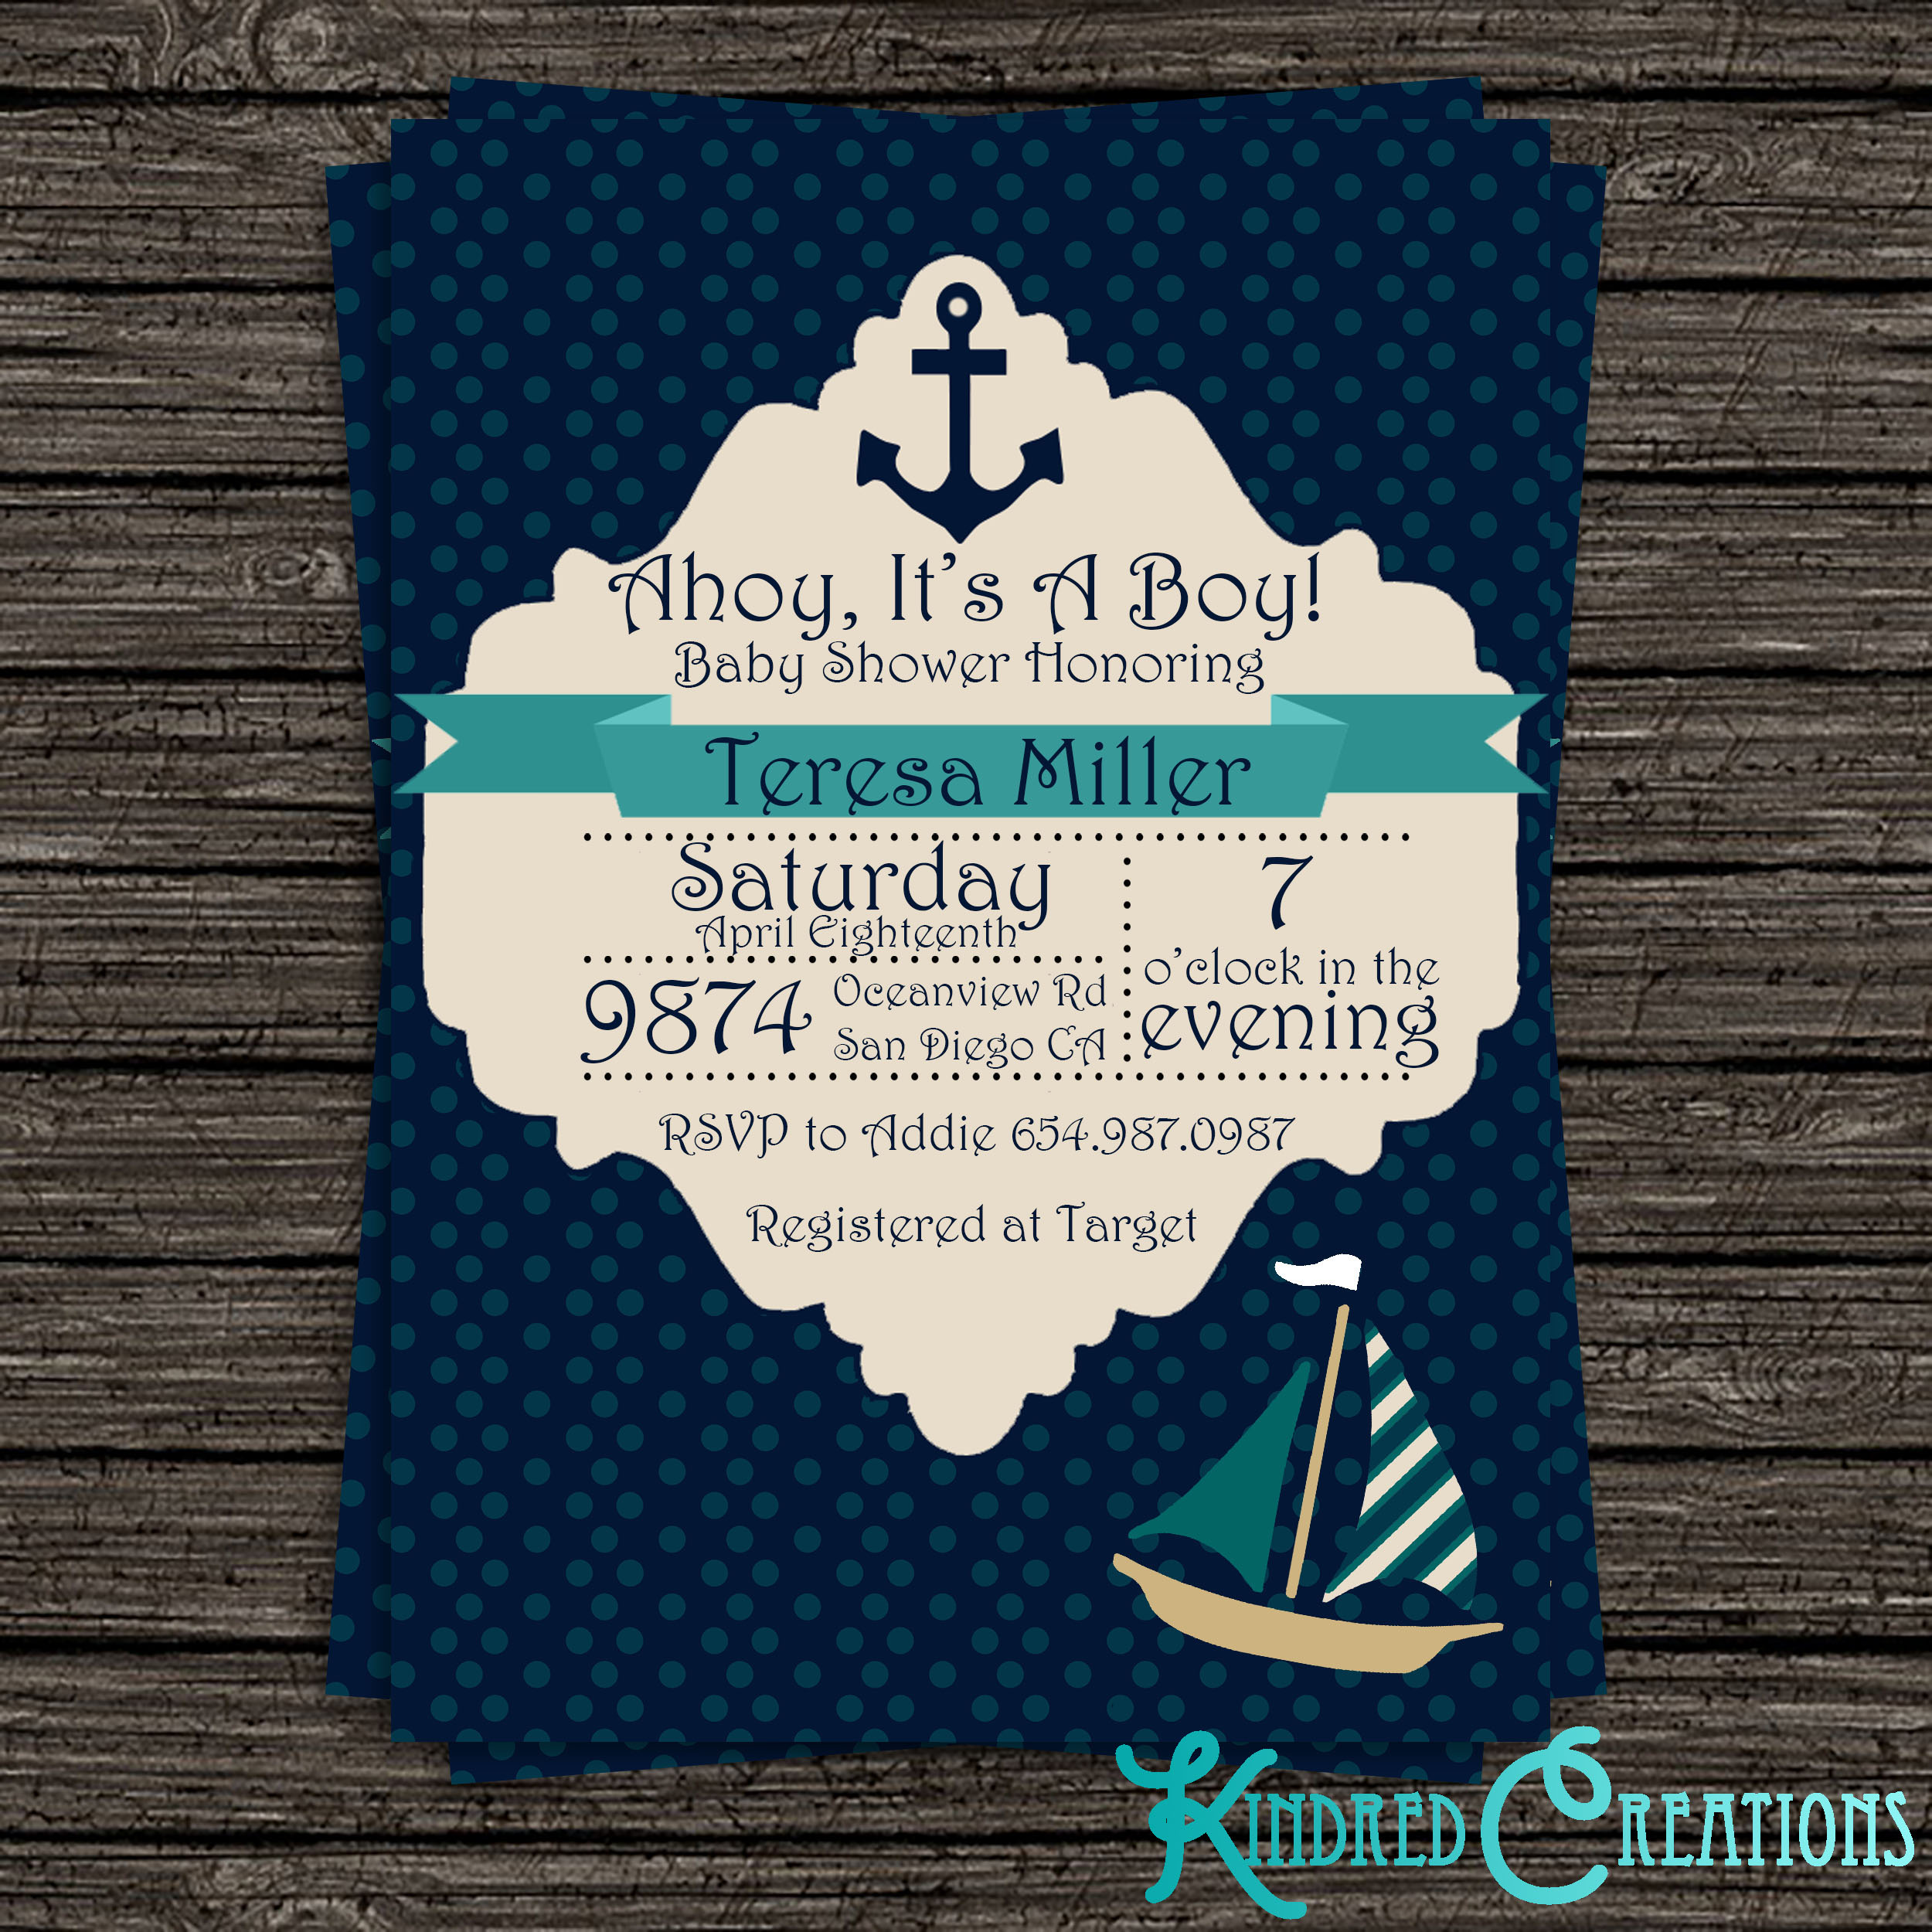 Full Size of Baby Shower:girl Baby Shower Decorations Baby Shower Decorations For Girls Baby Girl Themed Showers Nautical Baby Shower Invitations For Boys Elegant Baby Shower Oriental Trading Baby Shower Baby Shower Favors Ideas For Baby Shower Centerpieces